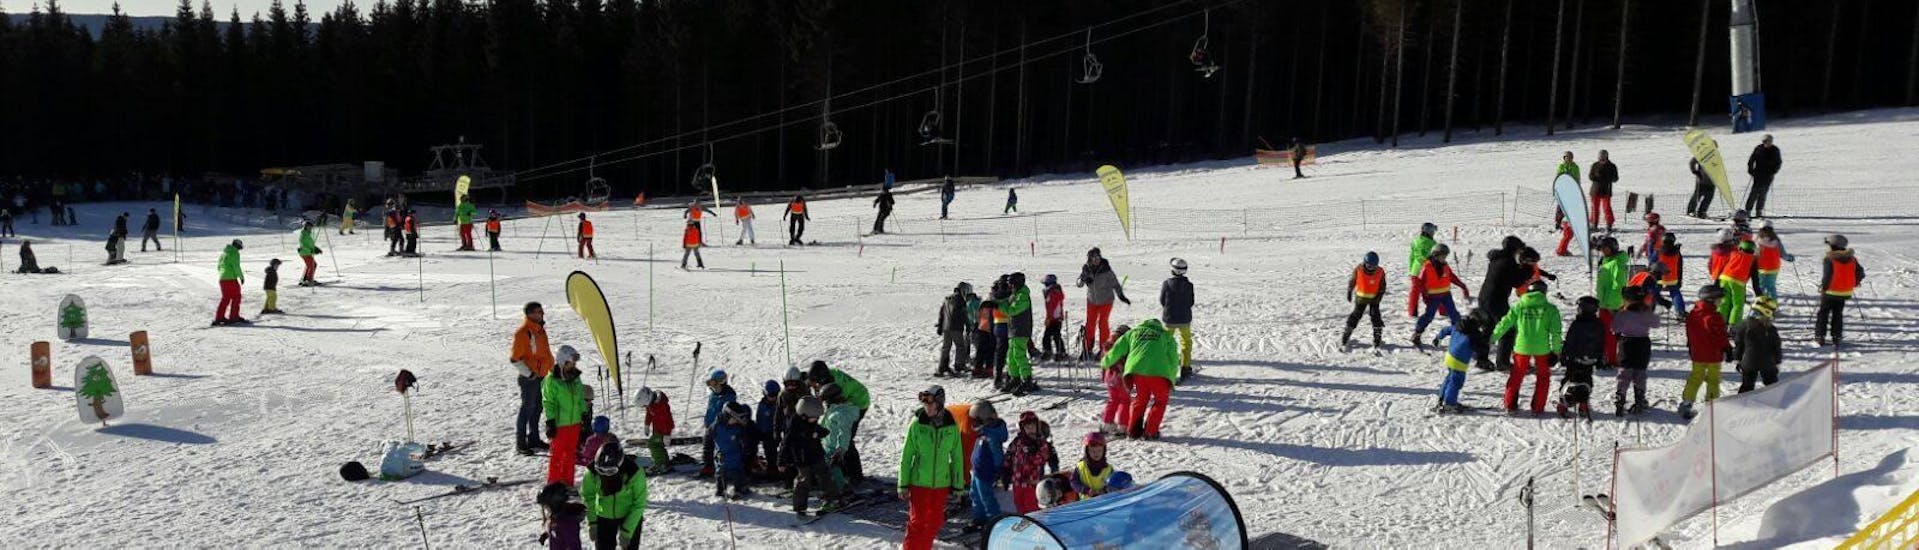 Kids Ski Lessons (9-11 y.) for First Timers.